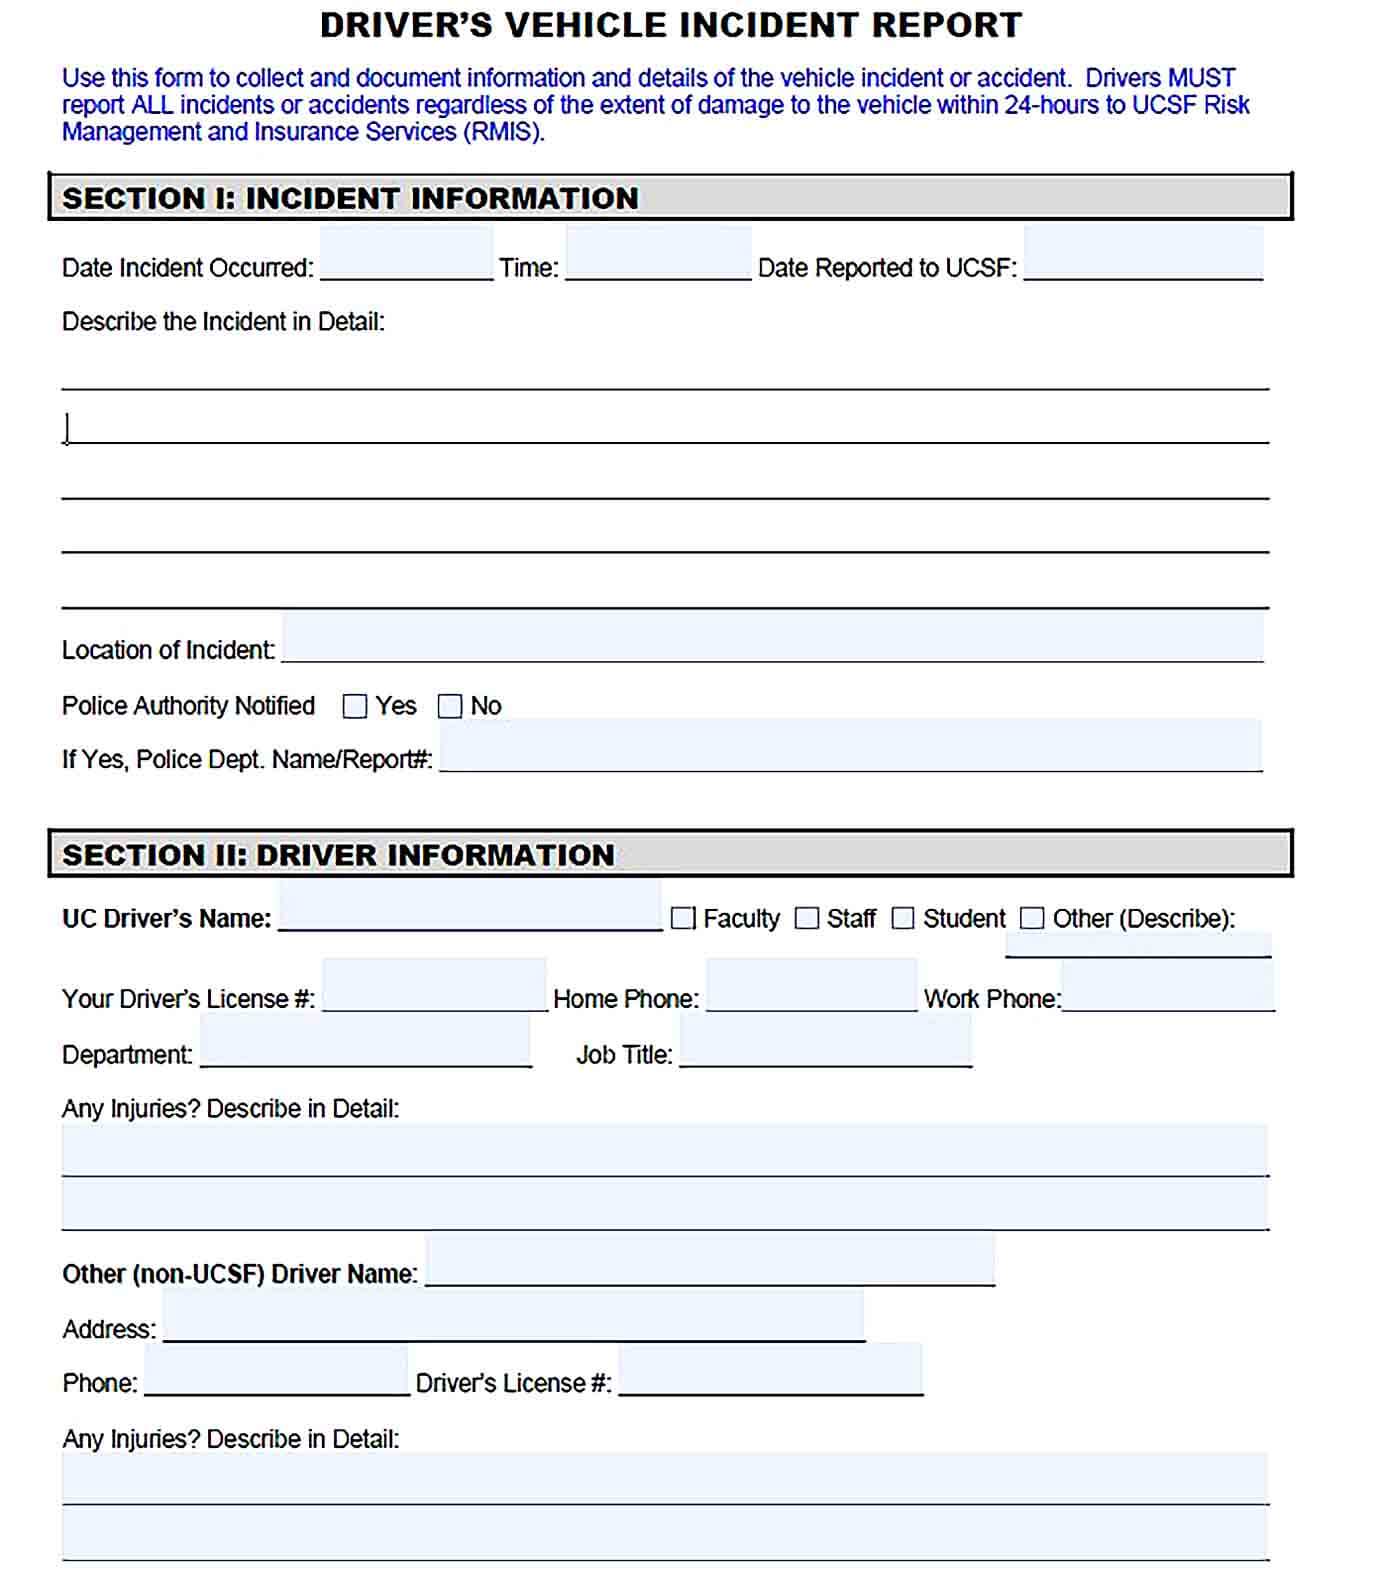 Sample Drivers Vehicle Incident Report Template